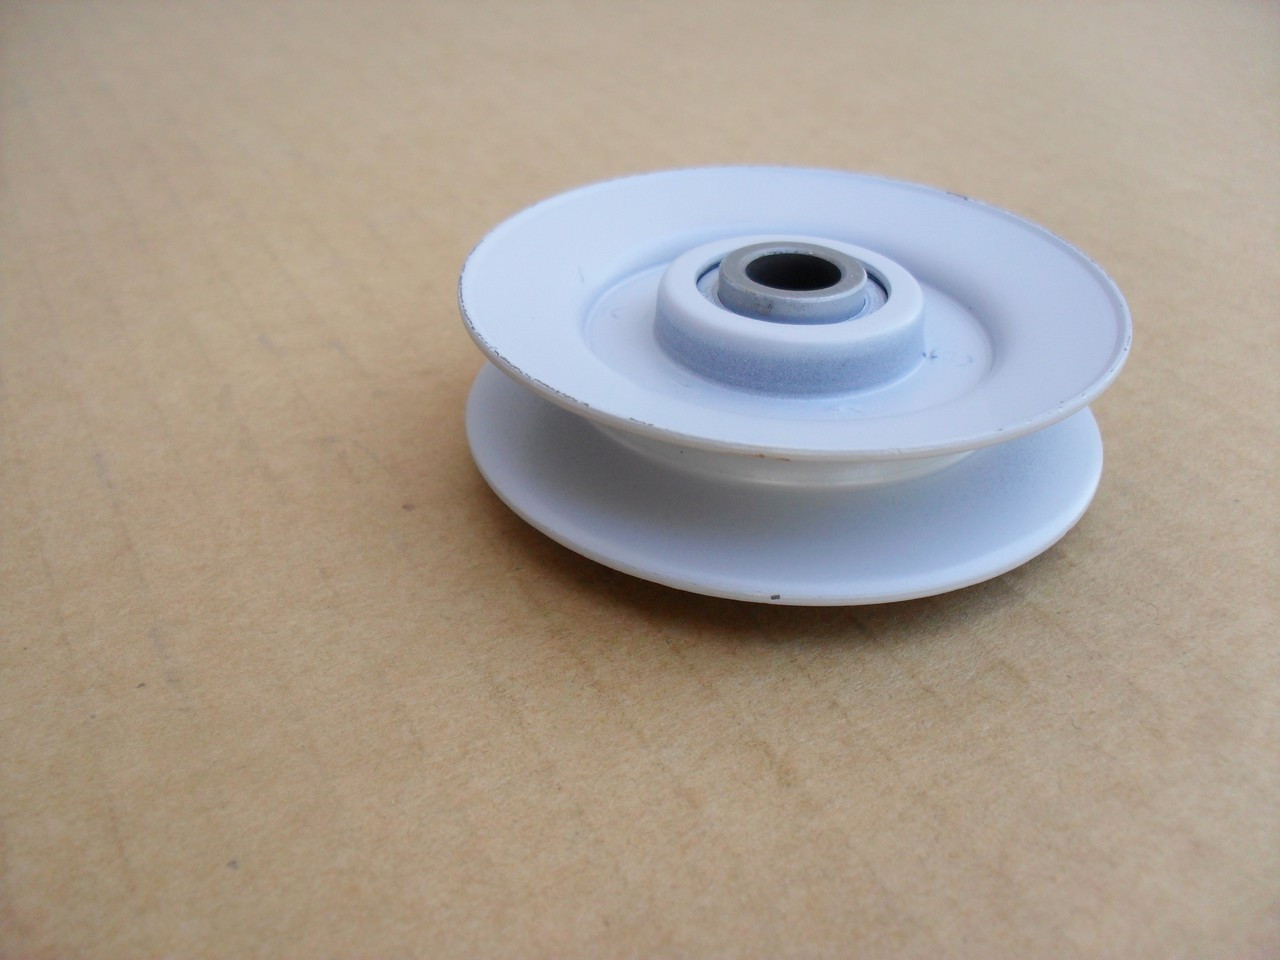 Idler Pulley for MTD 756-0166, 756-1035, 756-1035A, 756-166 Height: 5/8" ID: 3/8" OD: 2-5/8" Made In USA